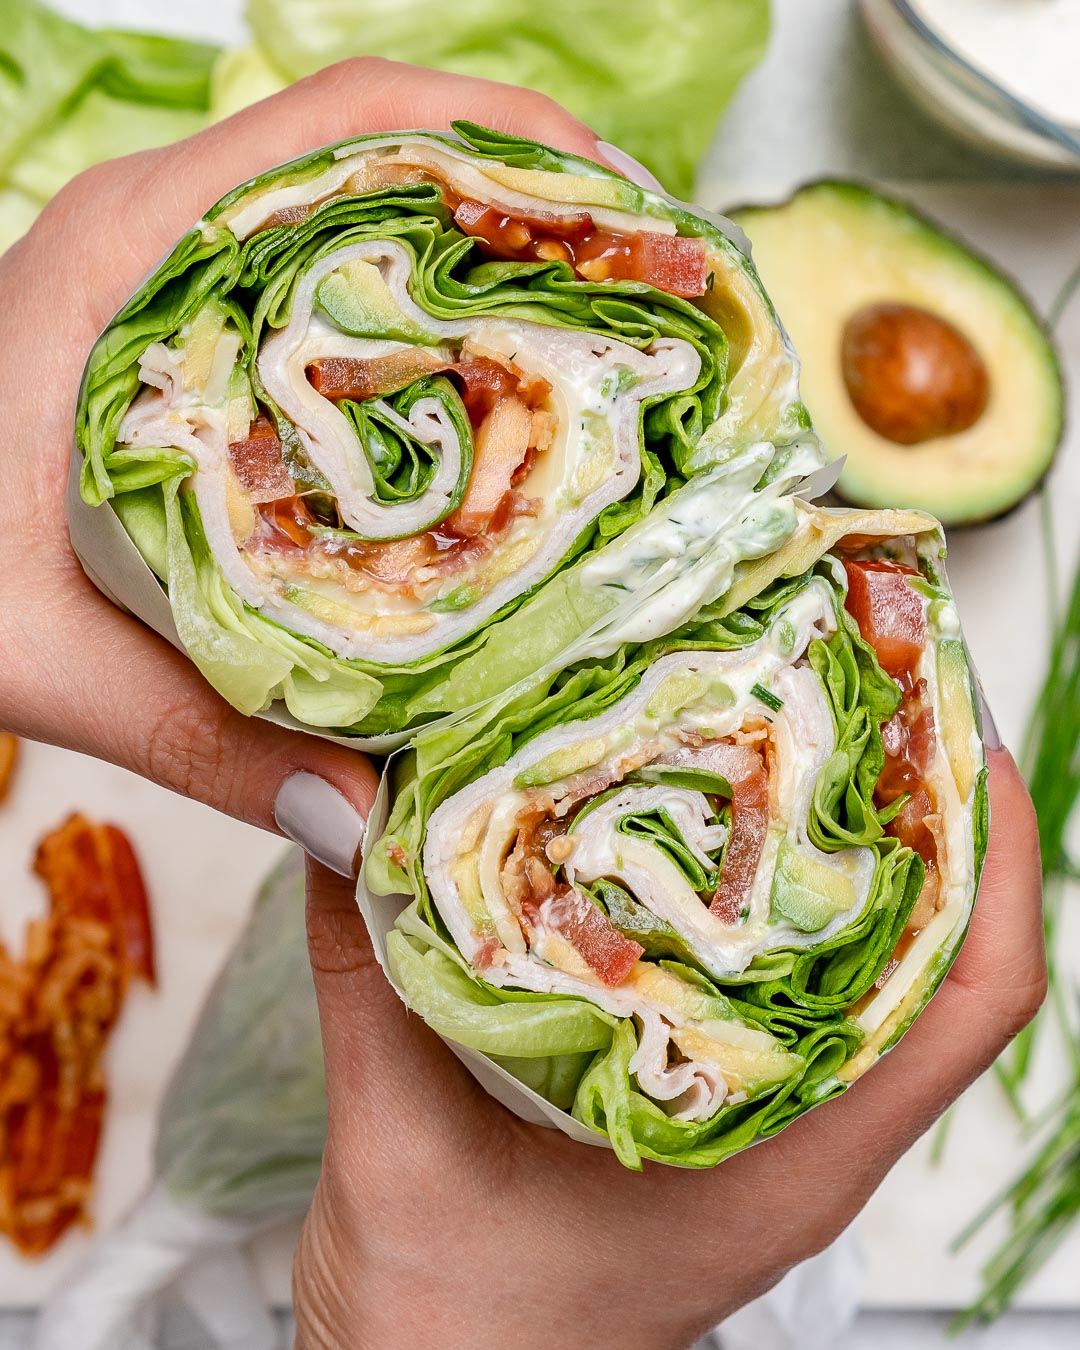 Ranch Chicken Club Lettuce Roll-Ups for Clean Eats! | Clean Food Crush